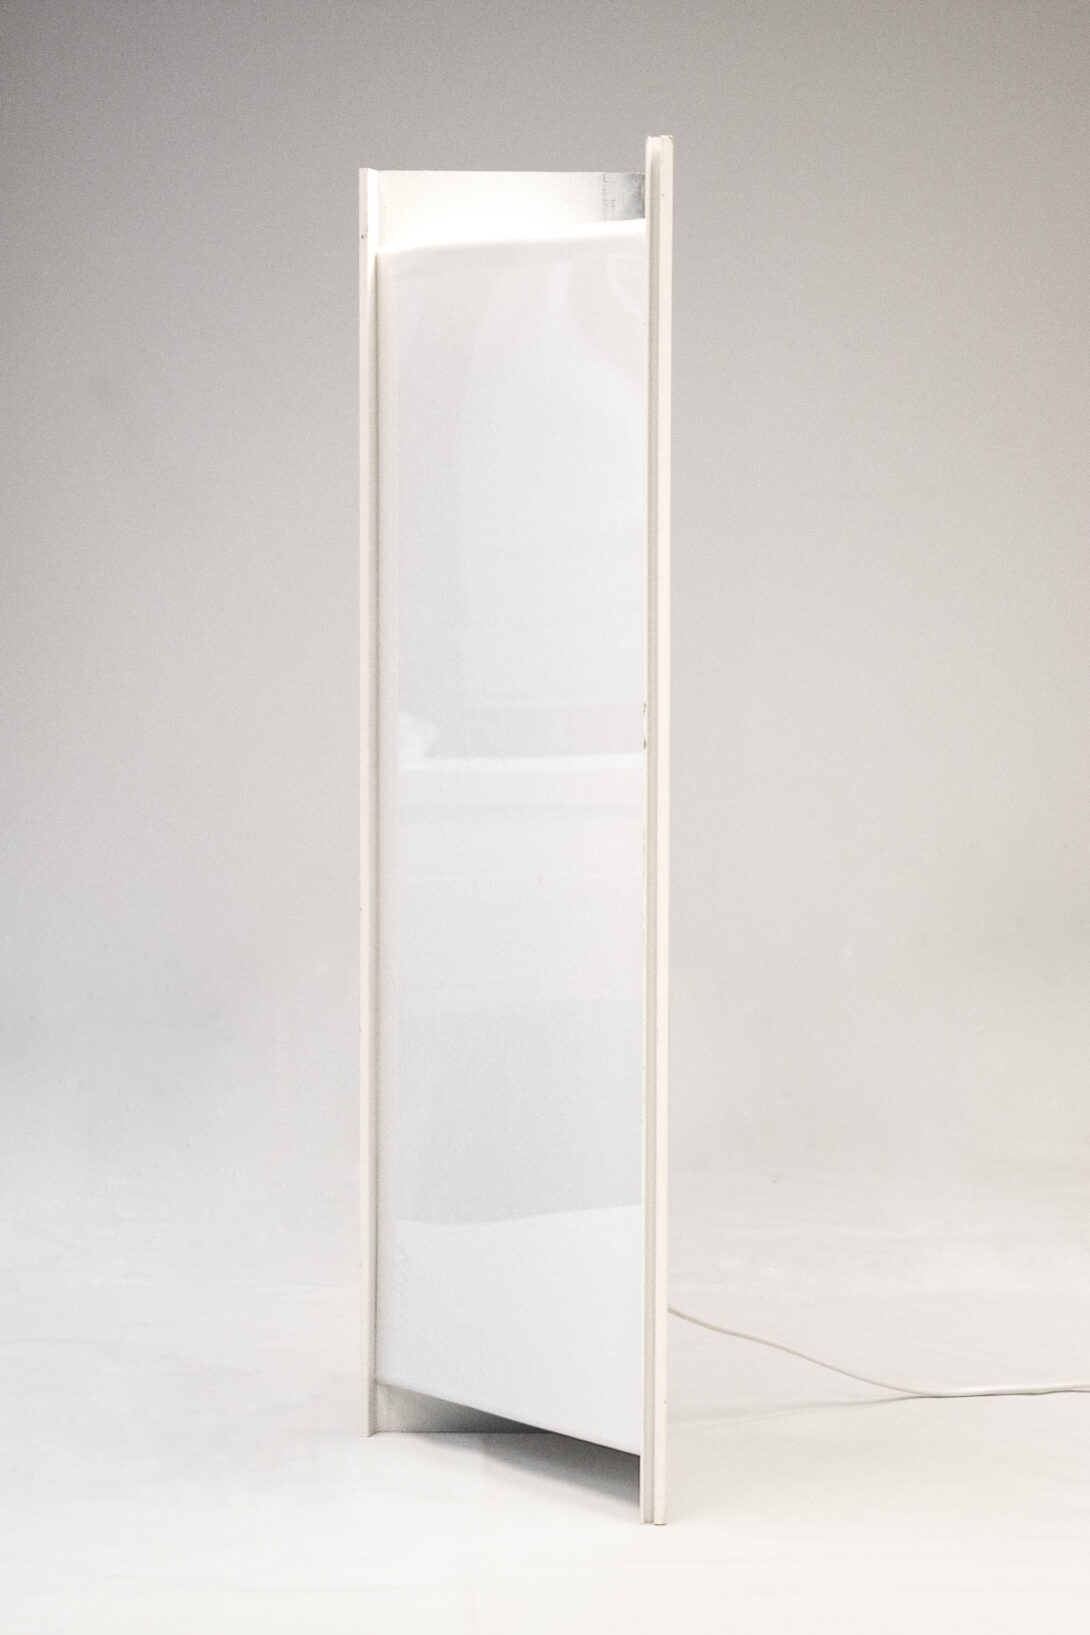 a vertically standing lamp made out of a white aluminium profile and a bent acryl plate on a white background